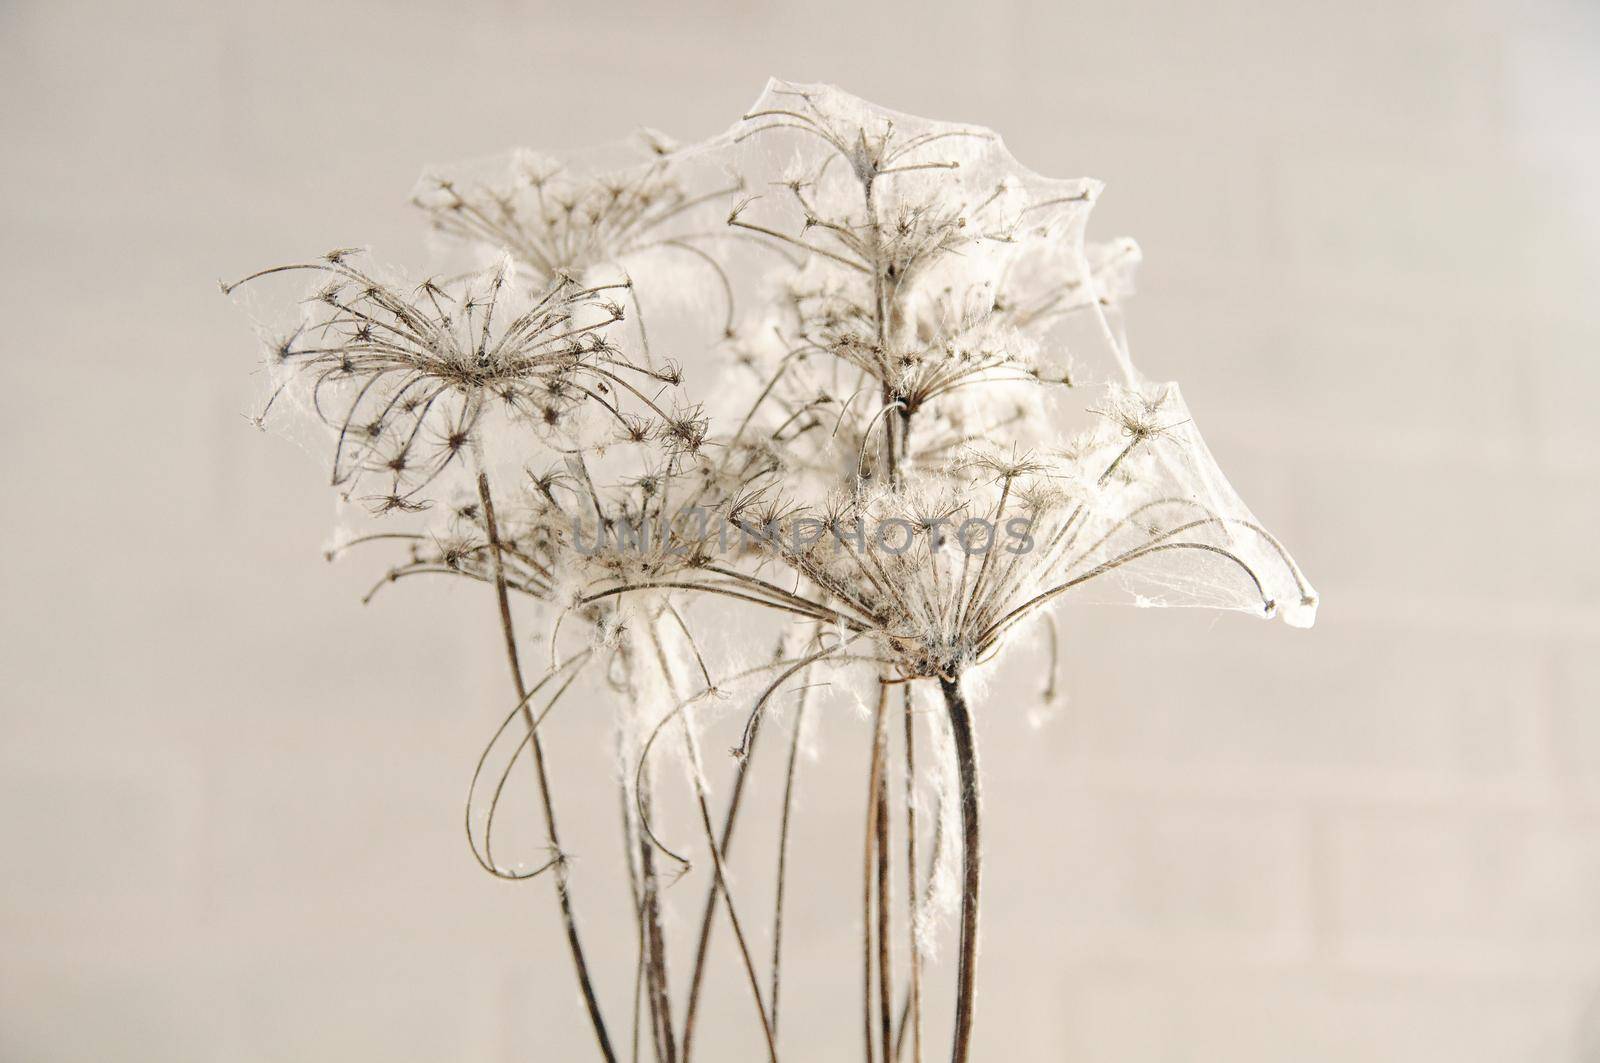 dry flowers braided with cobwebs on a brick wall background